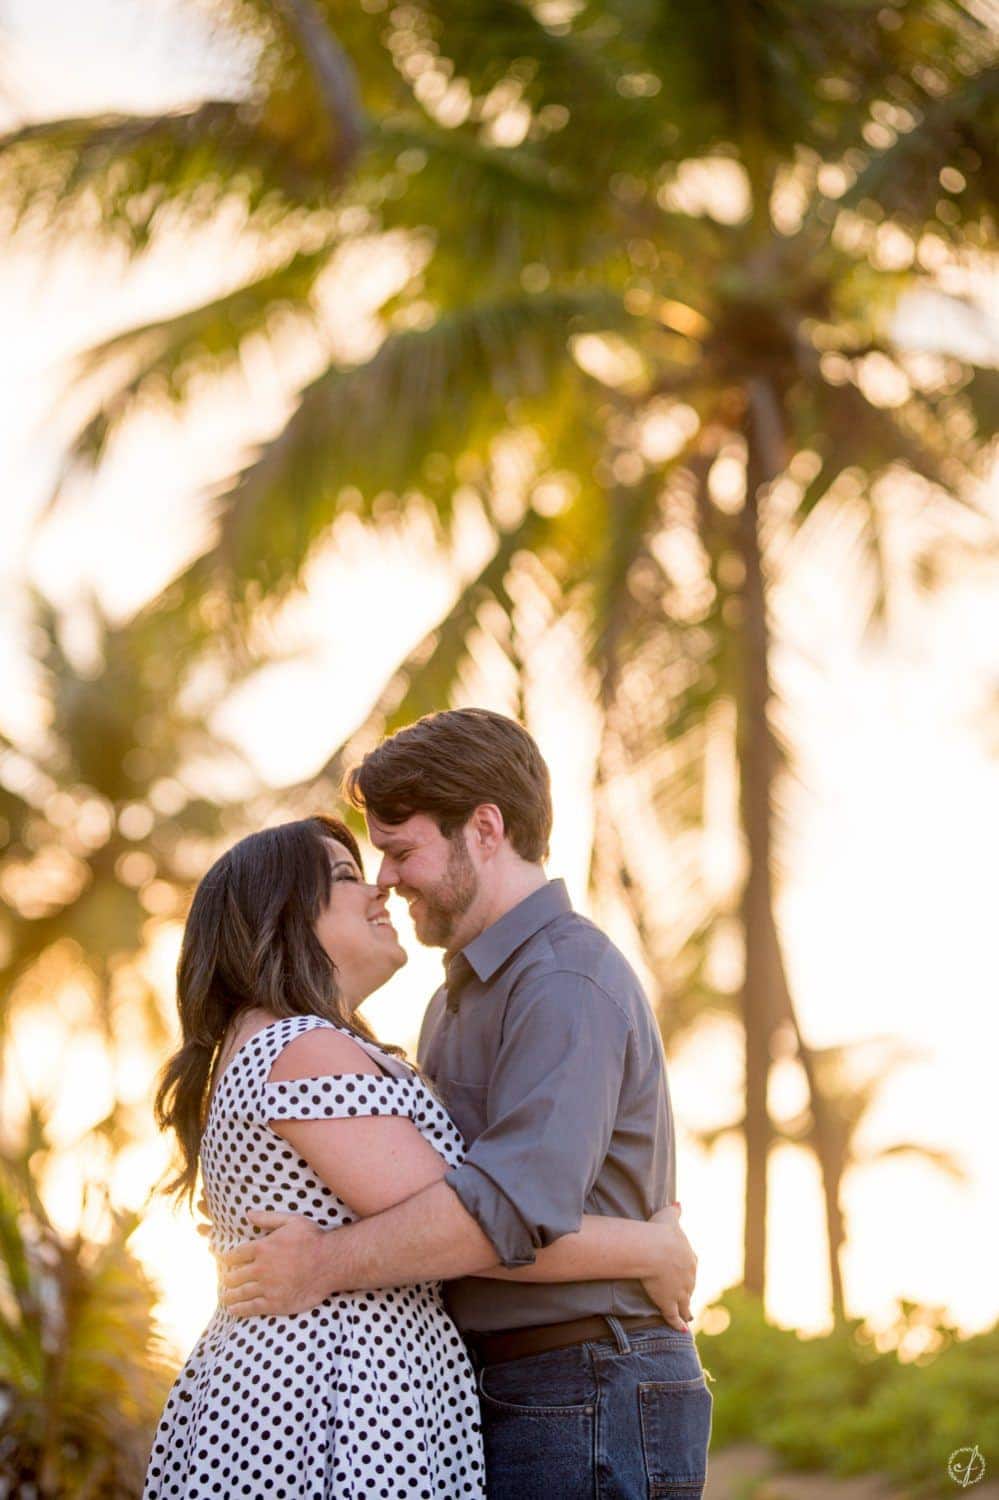 Beach engagement session photography at La Concha Resort in Condado Puerto Rico by Camille Fontanez